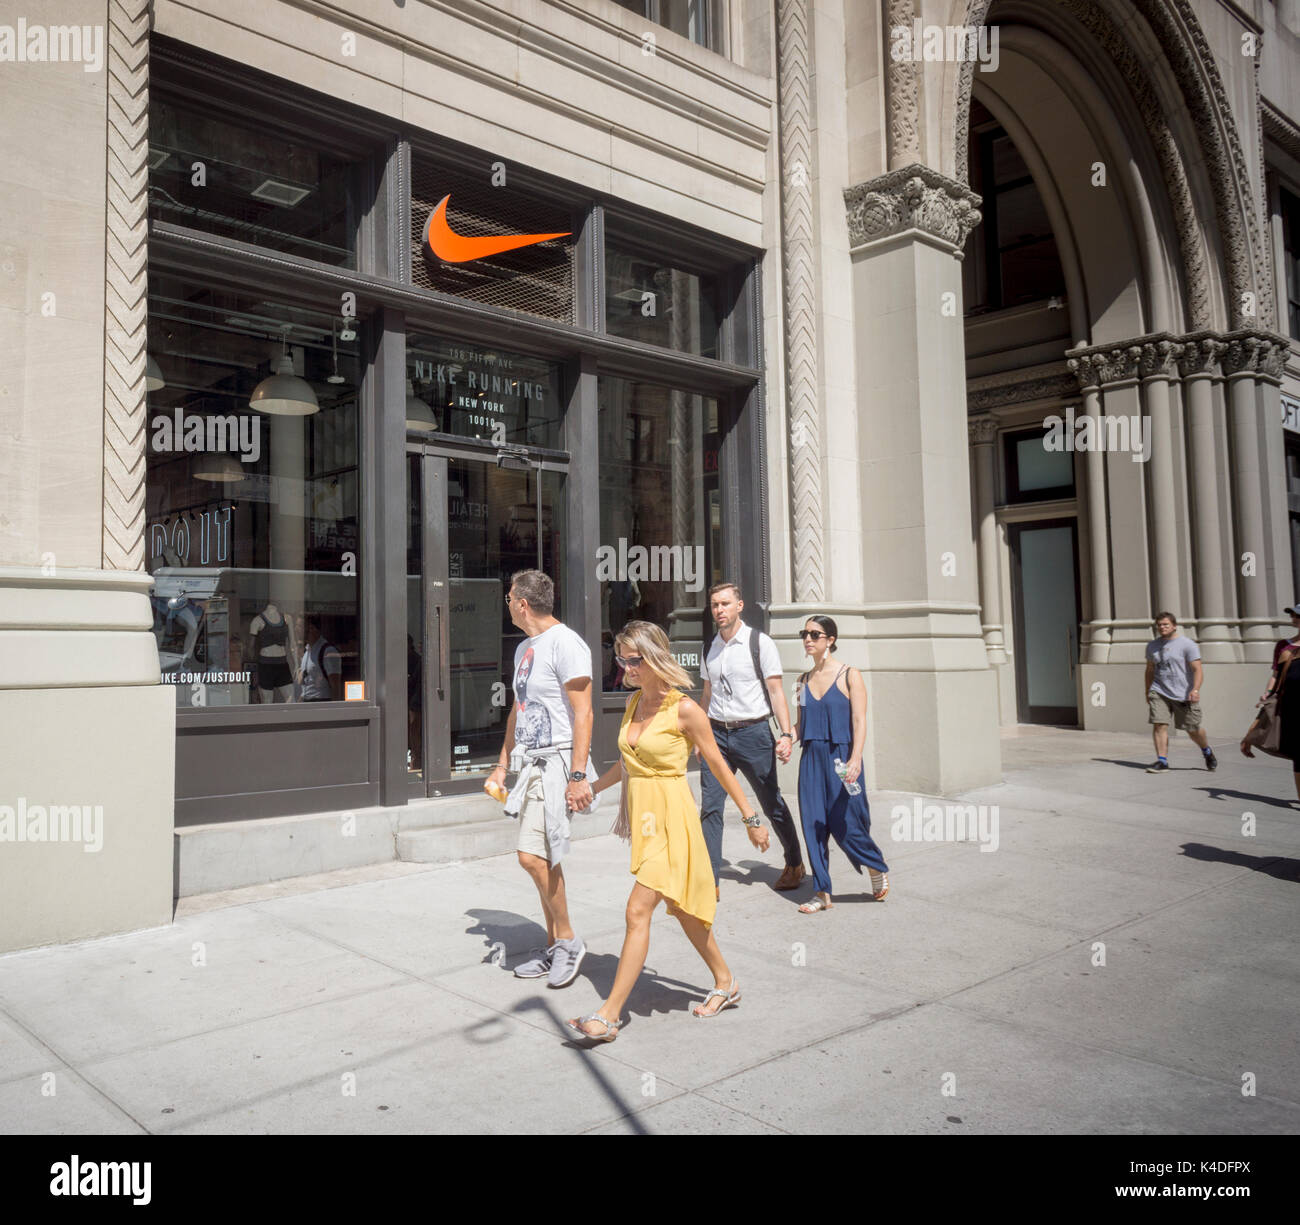 A Nike store in the Flatiron district in New York on Saturday, August 26, 2017. (© Richard B. Levine) Stock Photo